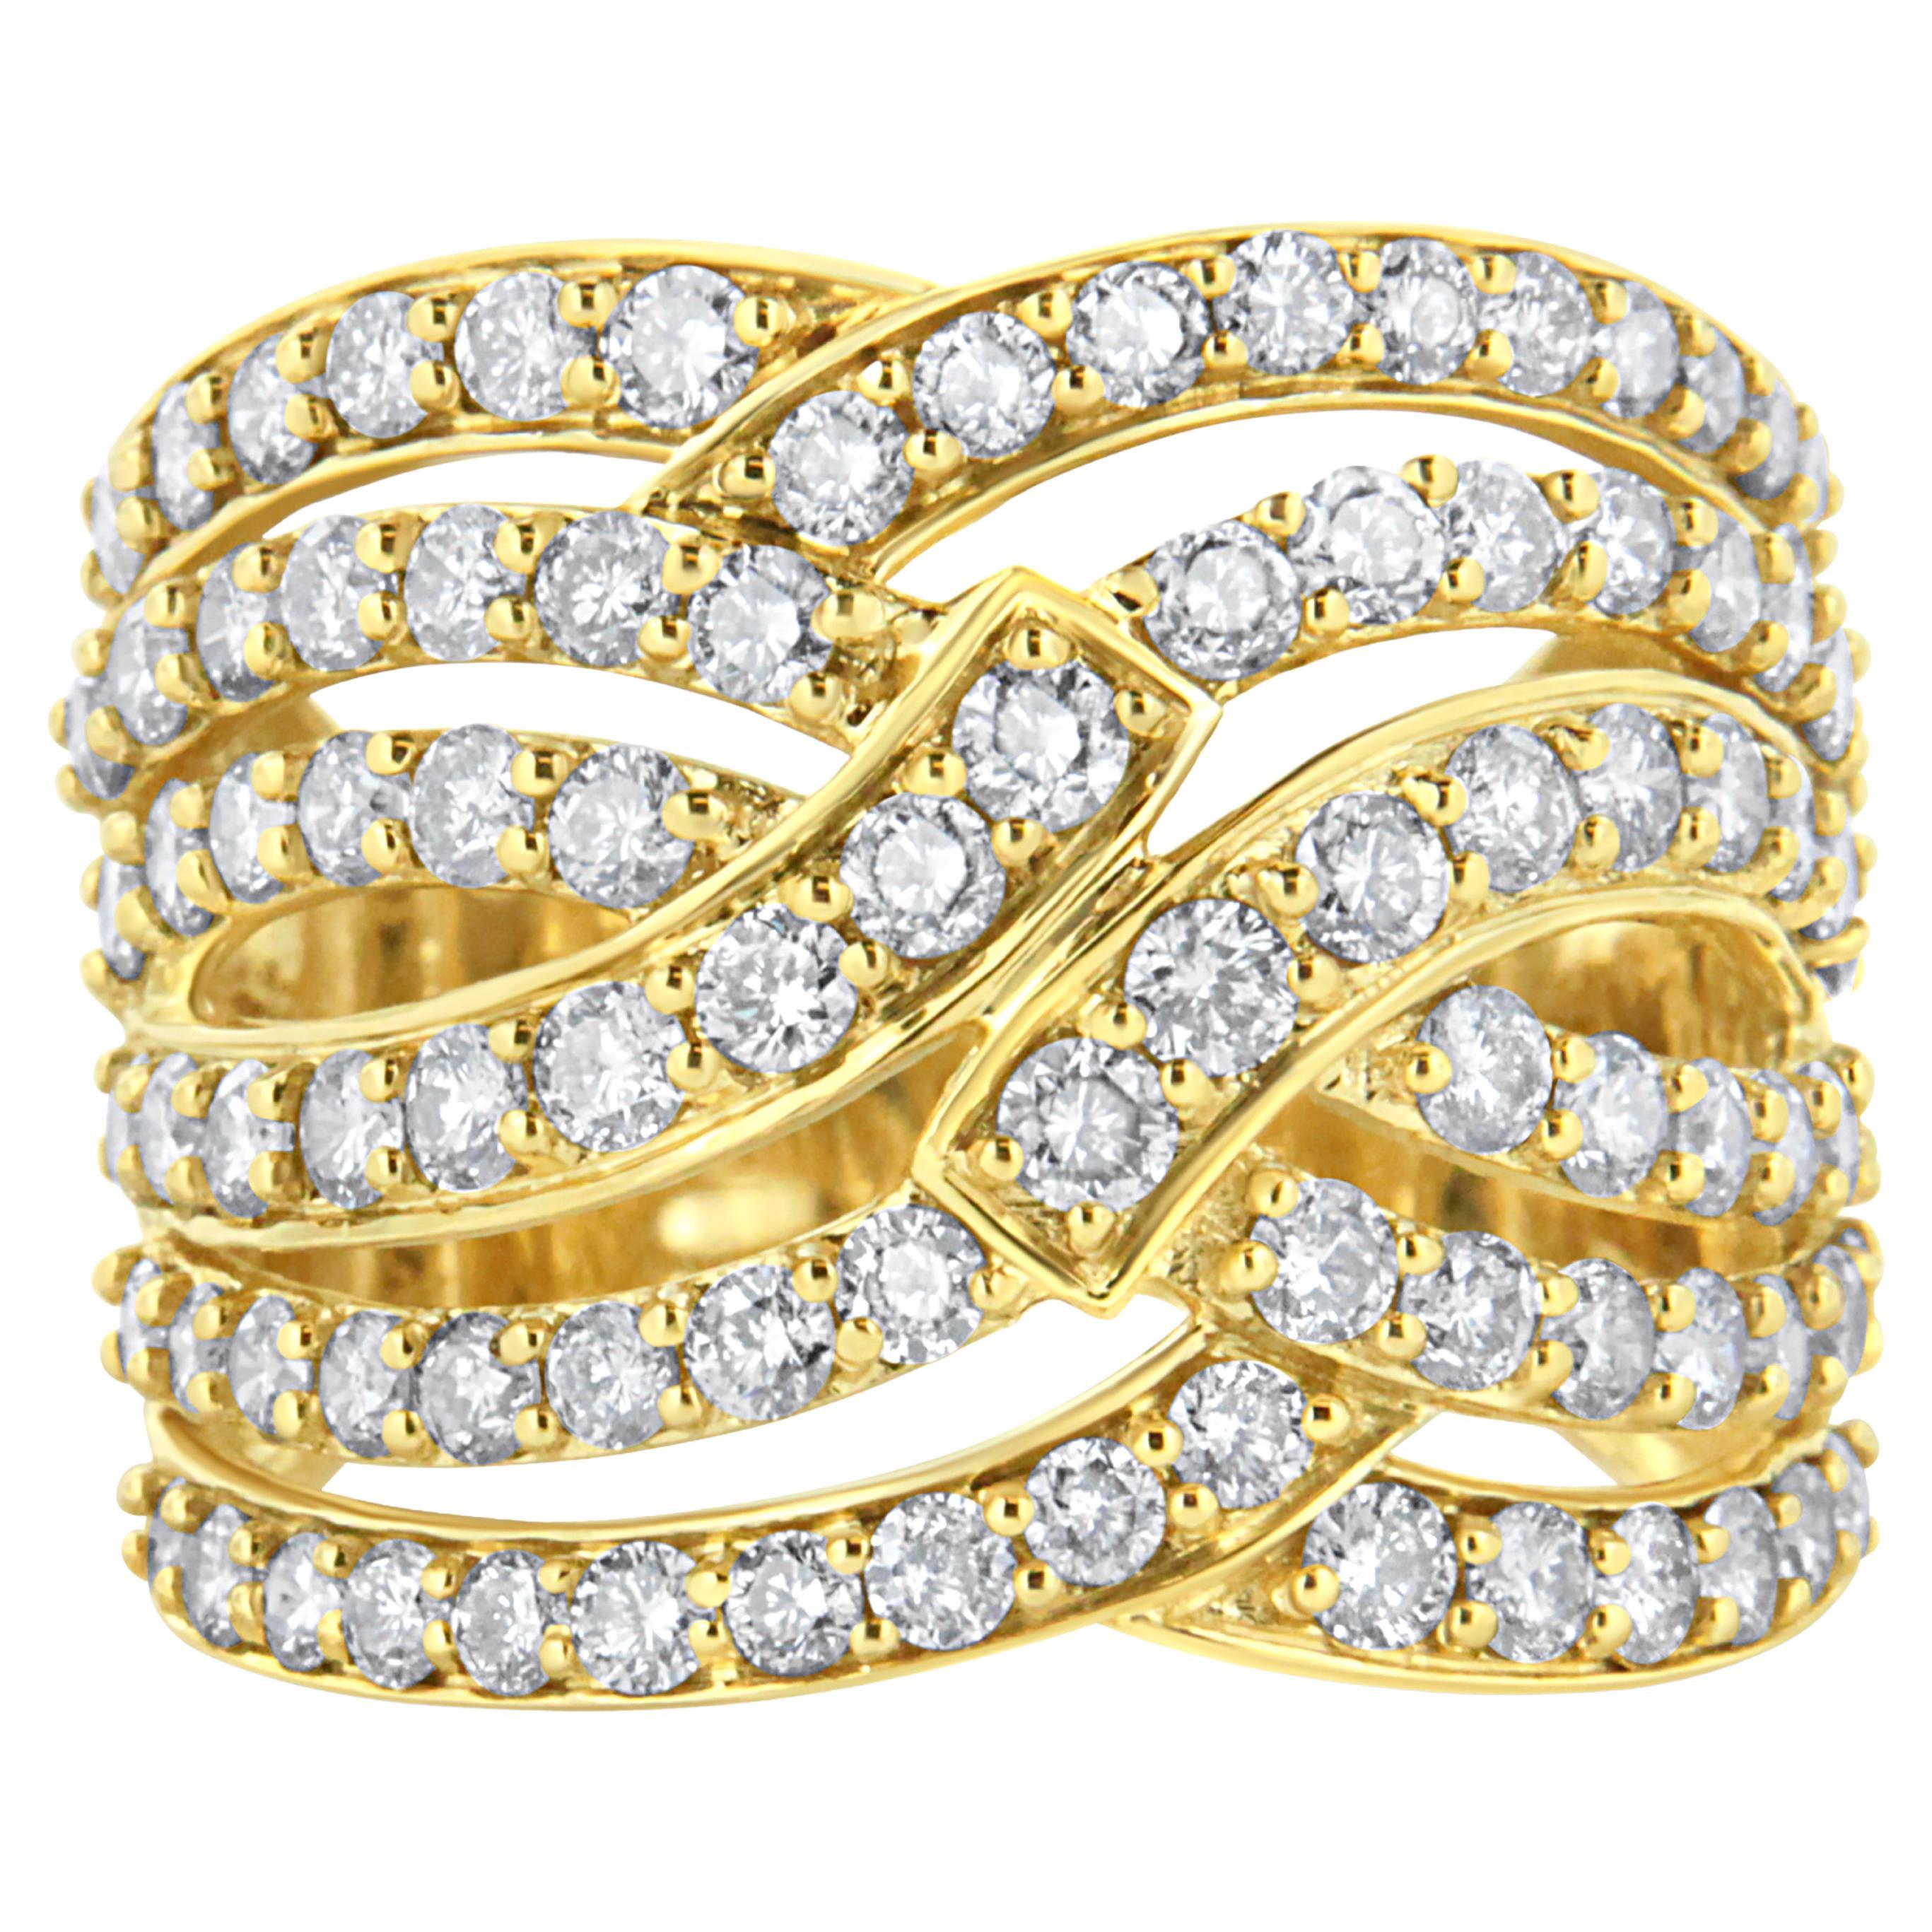 10K Yellow Gold 3.00 Carat Diamond Multi Row Bypass Wave Cocktail Band Ring